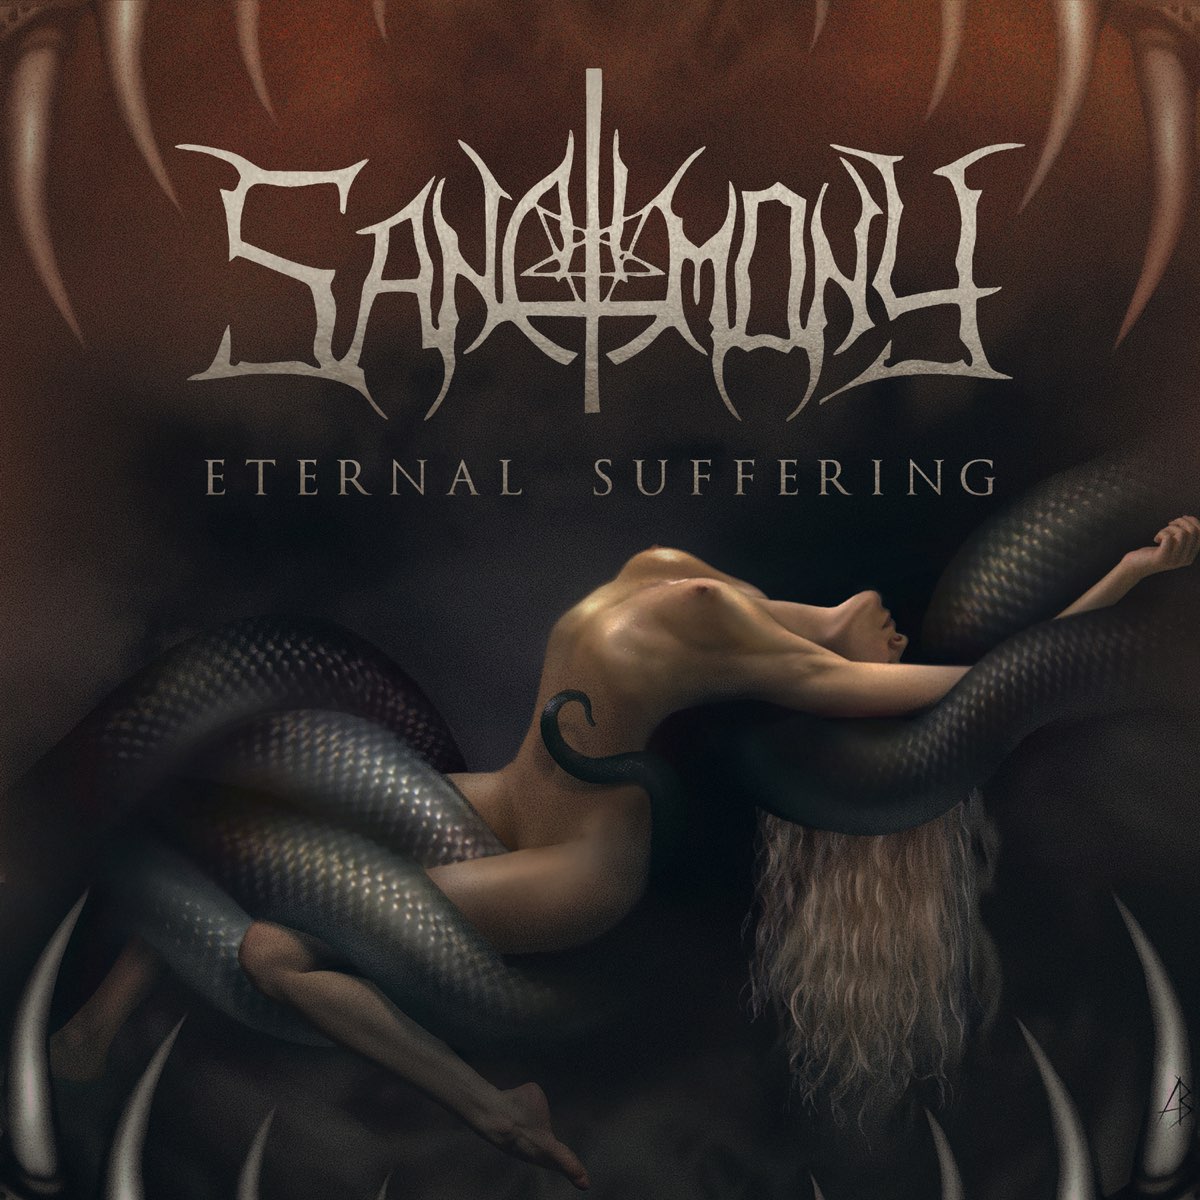 Eternal Suffering by Sanctimony on Apple Music